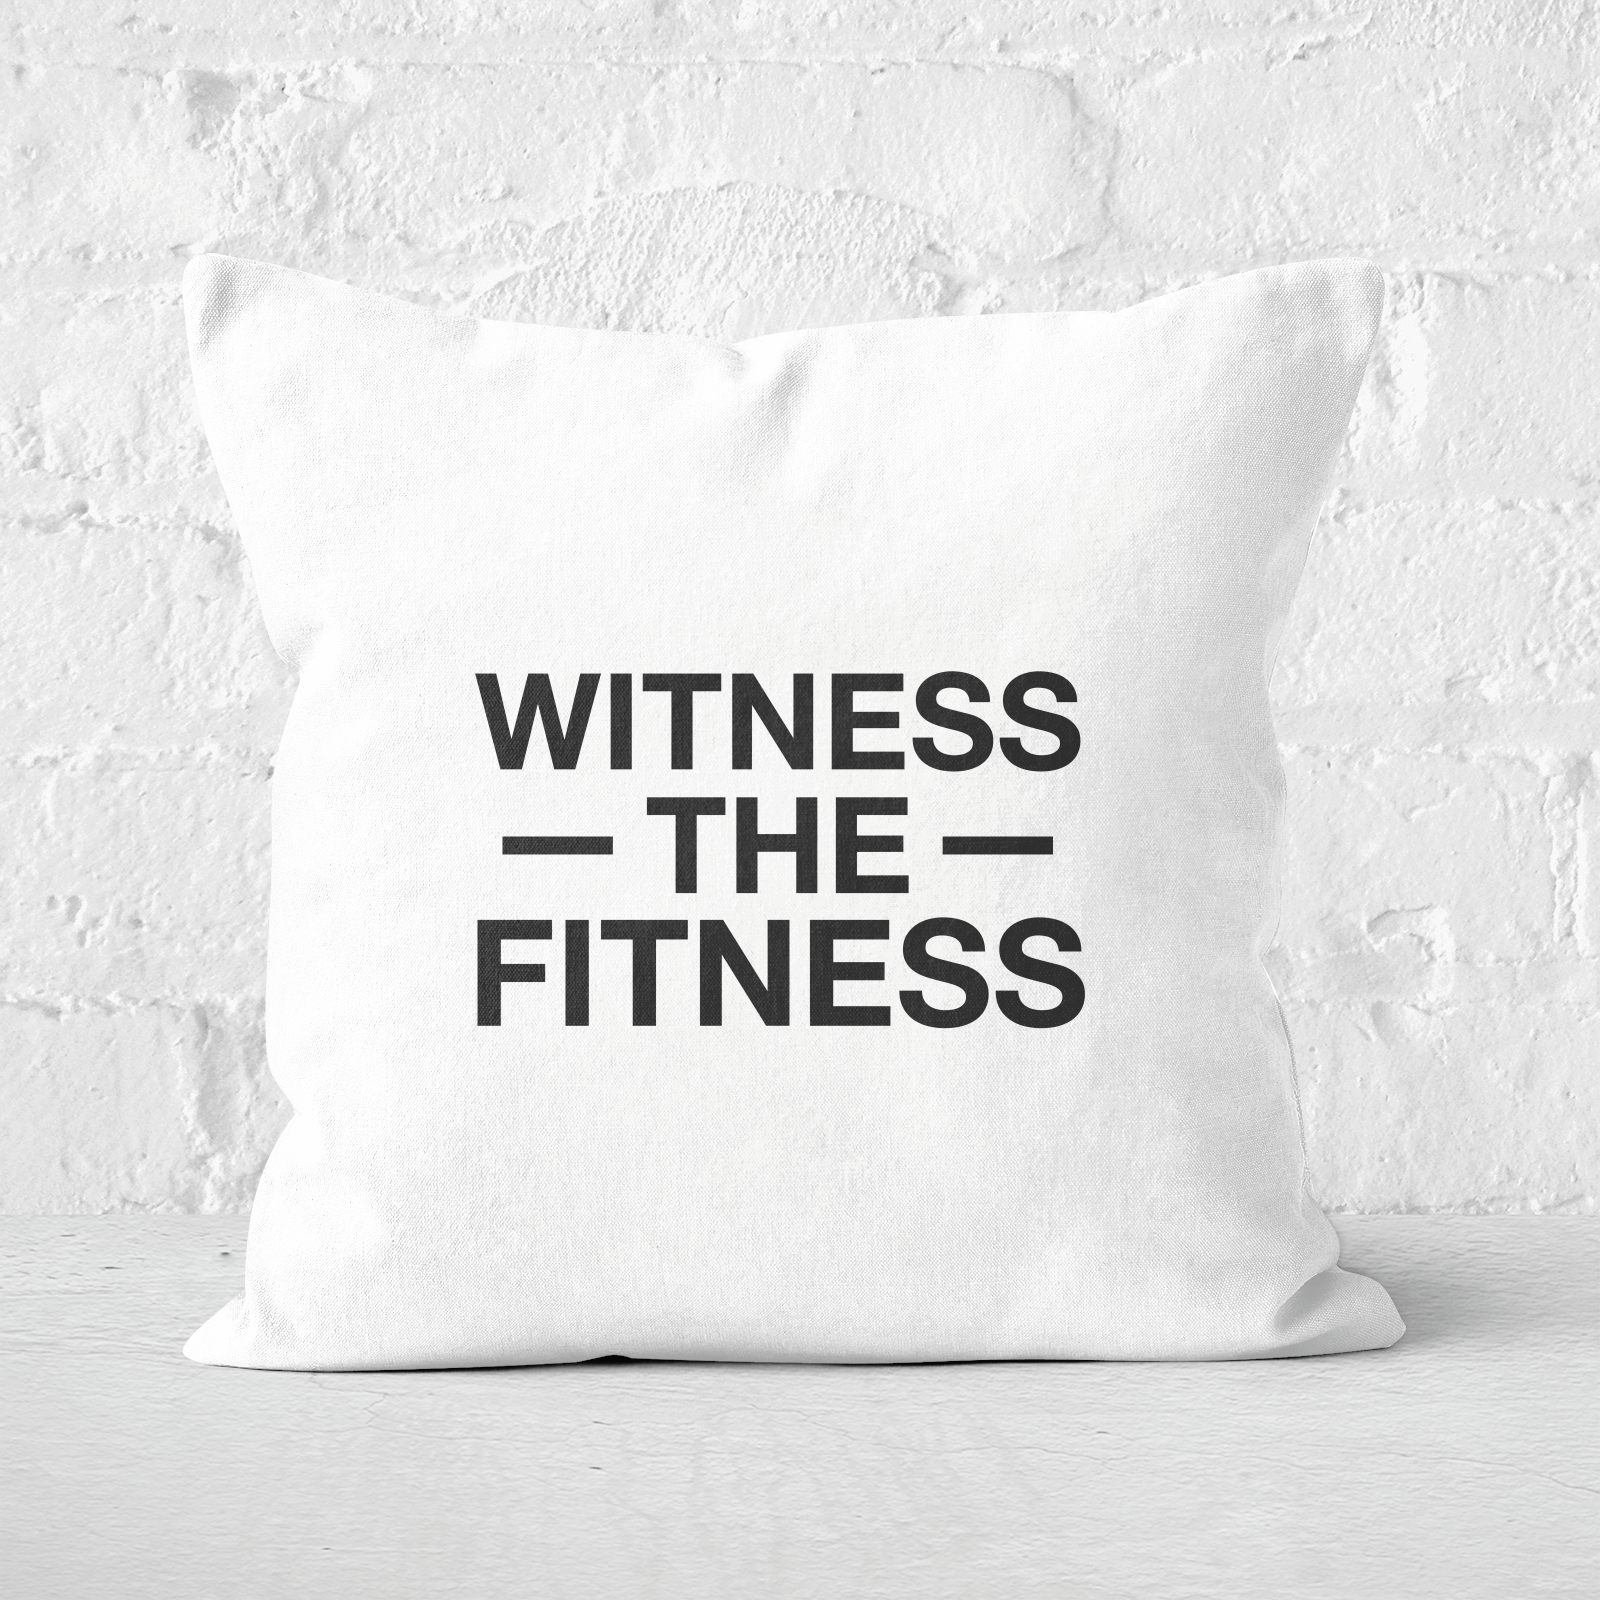 Witness The Fitness Square Cushion - 60x60cm - Soft Touch